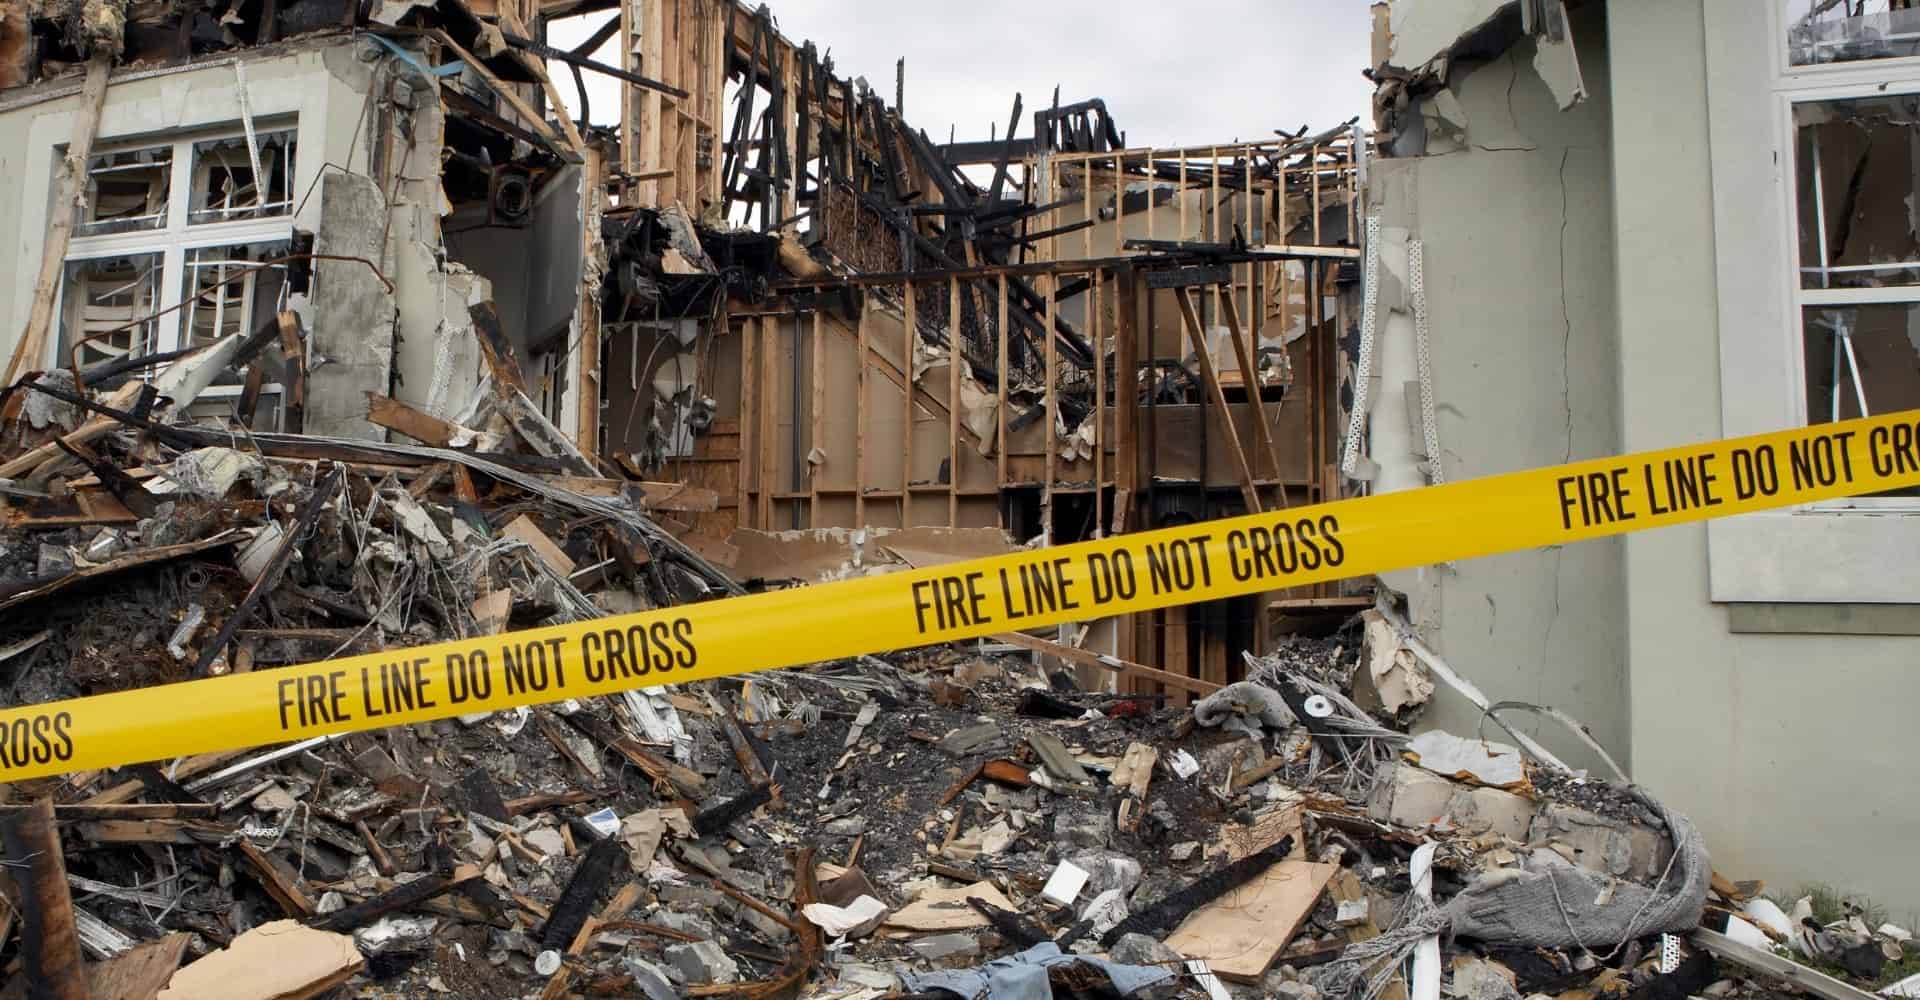 Alconero and Associates - Who's To Blame For Apartment Fire Damages